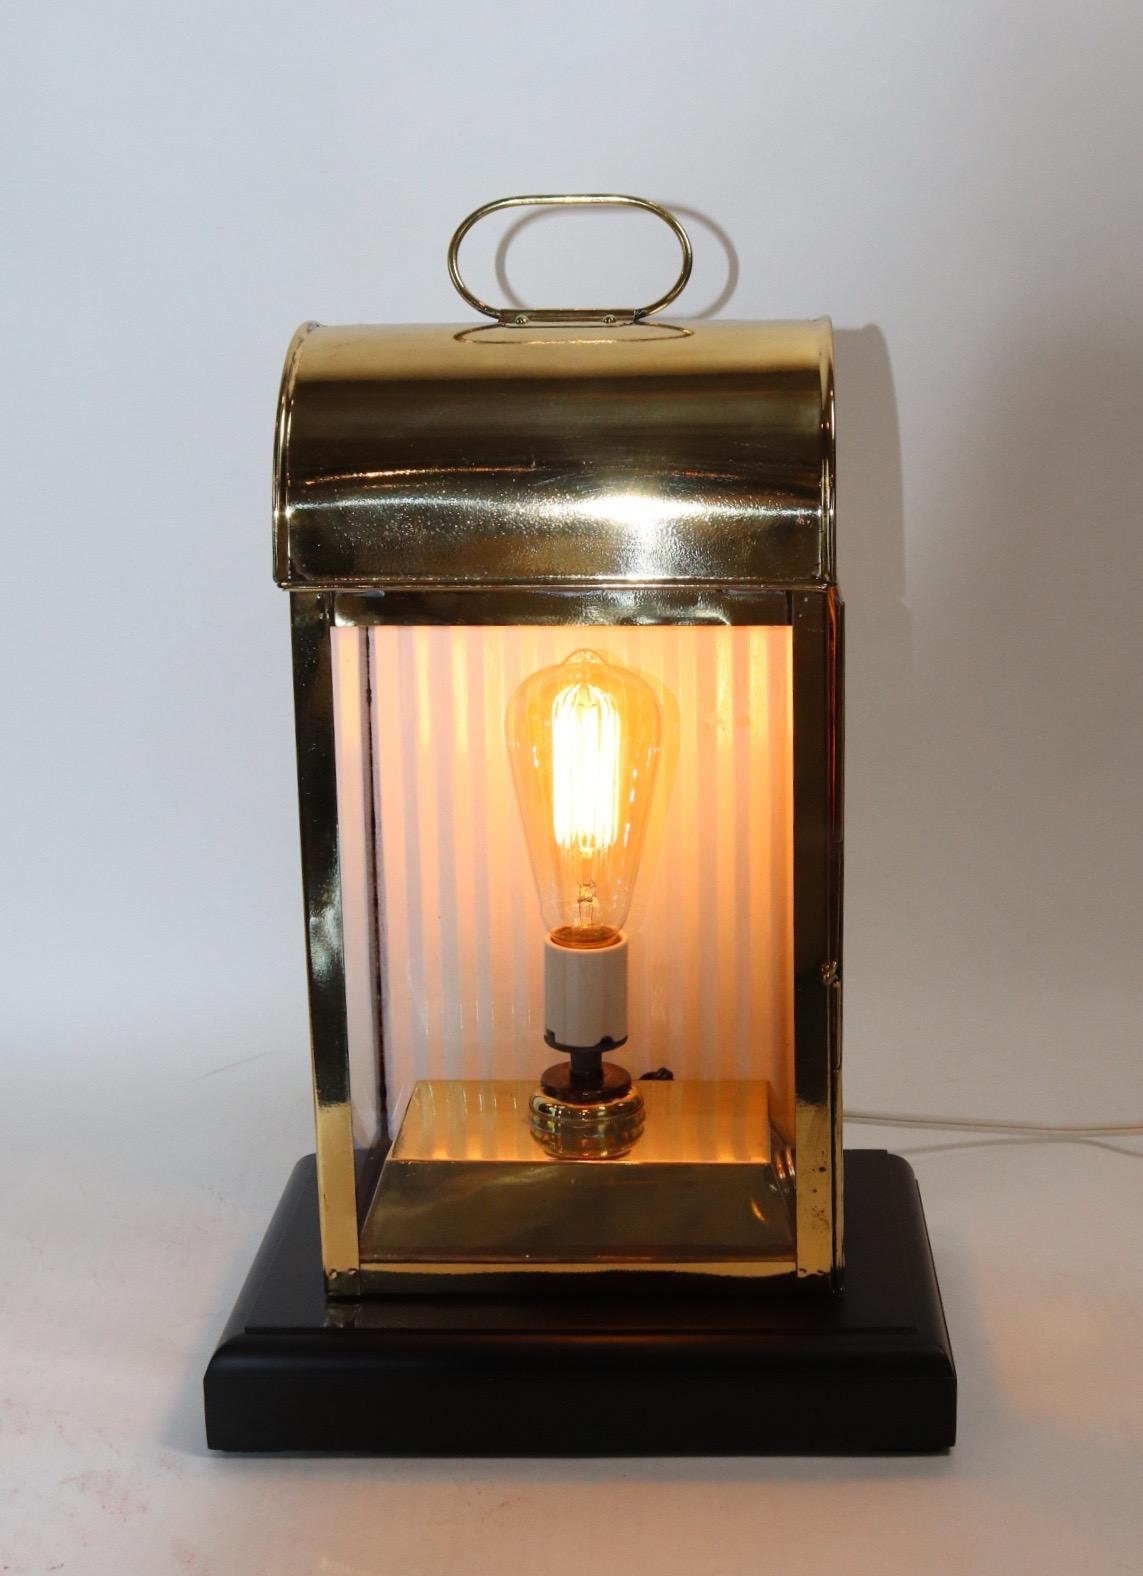 Solid brass ships cabin lantern with three glass panes, hinged access door, carry handle, mounted to a custom wood base with rich dark finish. Wired for home display. Weight is 8 pounds.